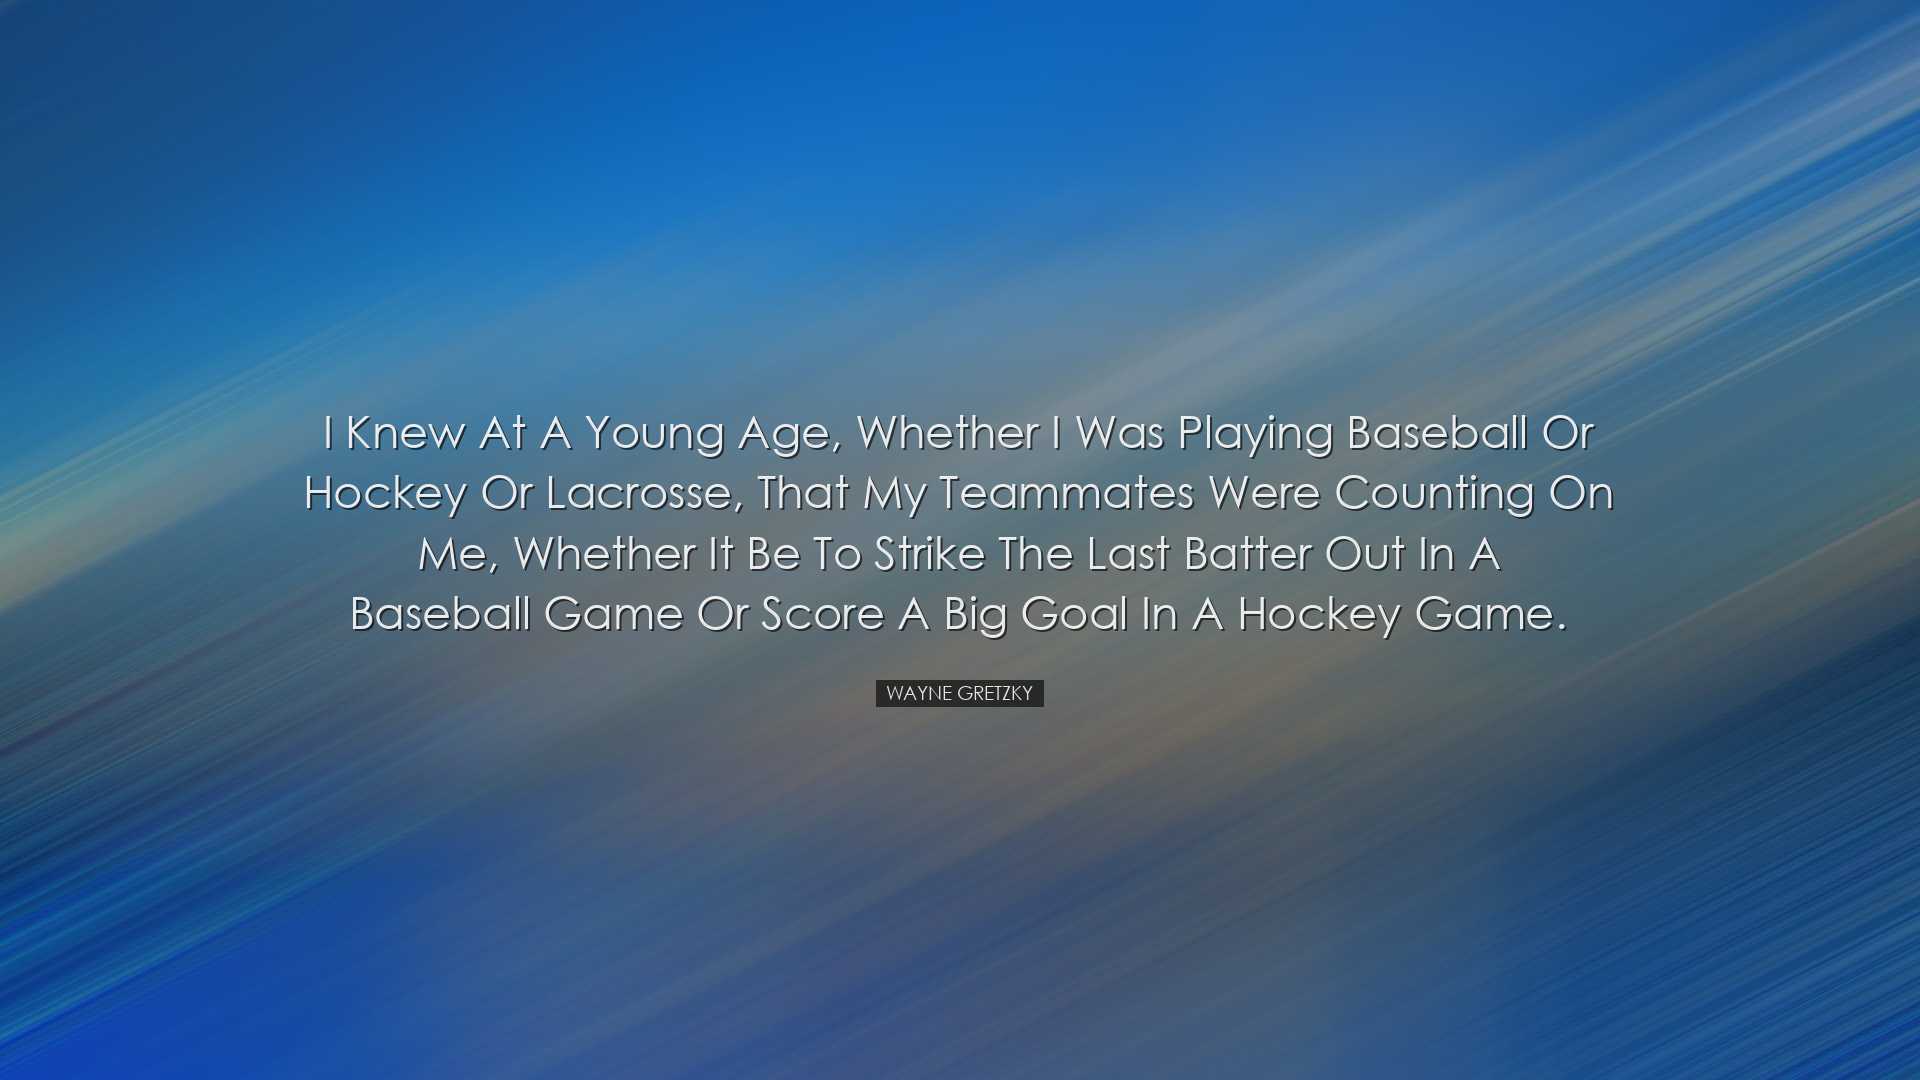 I knew at a young age, whether I was playing baseball or hockey or